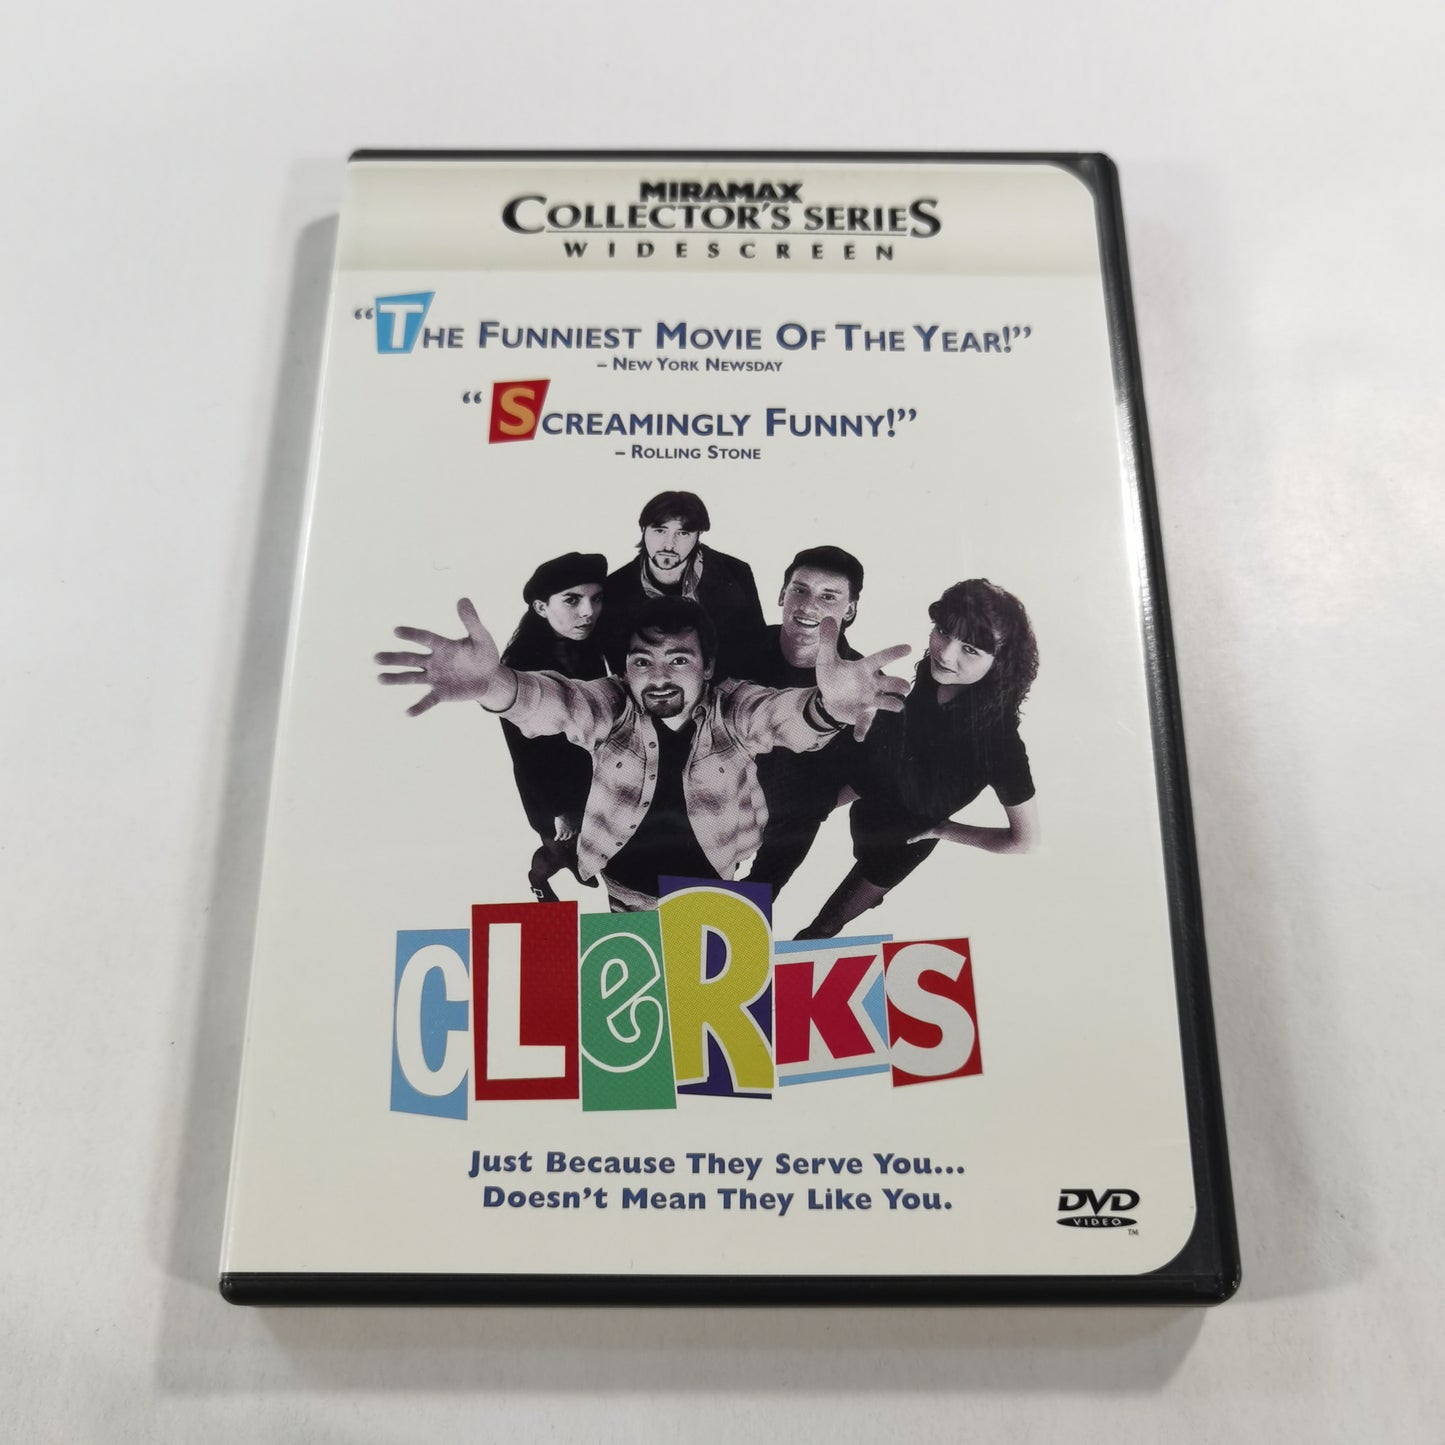 Clerks (1994) - DVD US MirMax Collector's Series